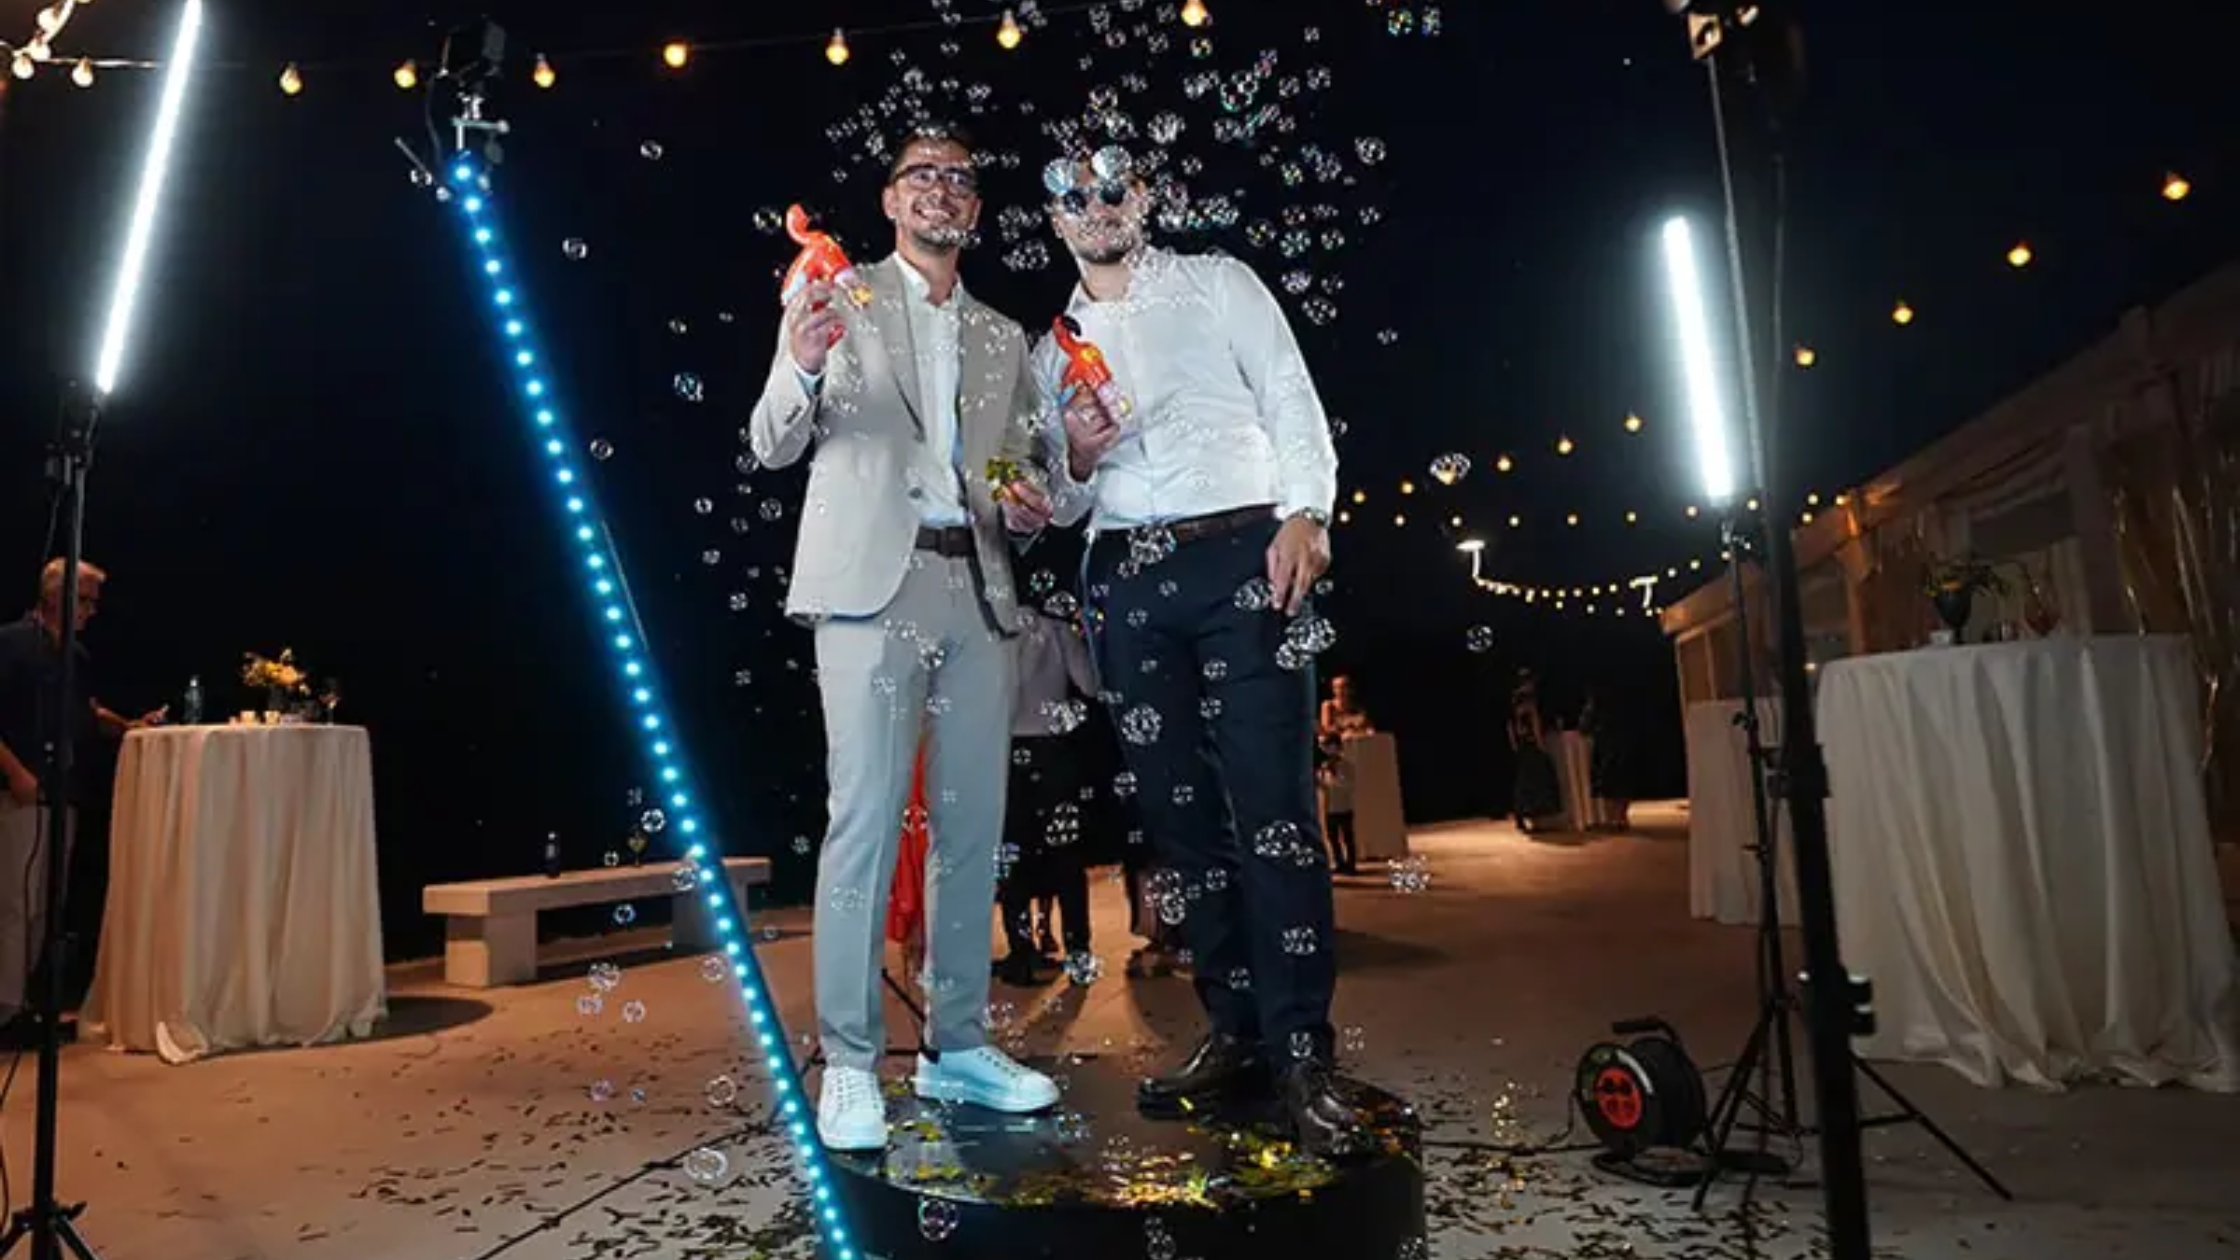 Why You Need an Awesome 360° Photo Booth for Your Next Event